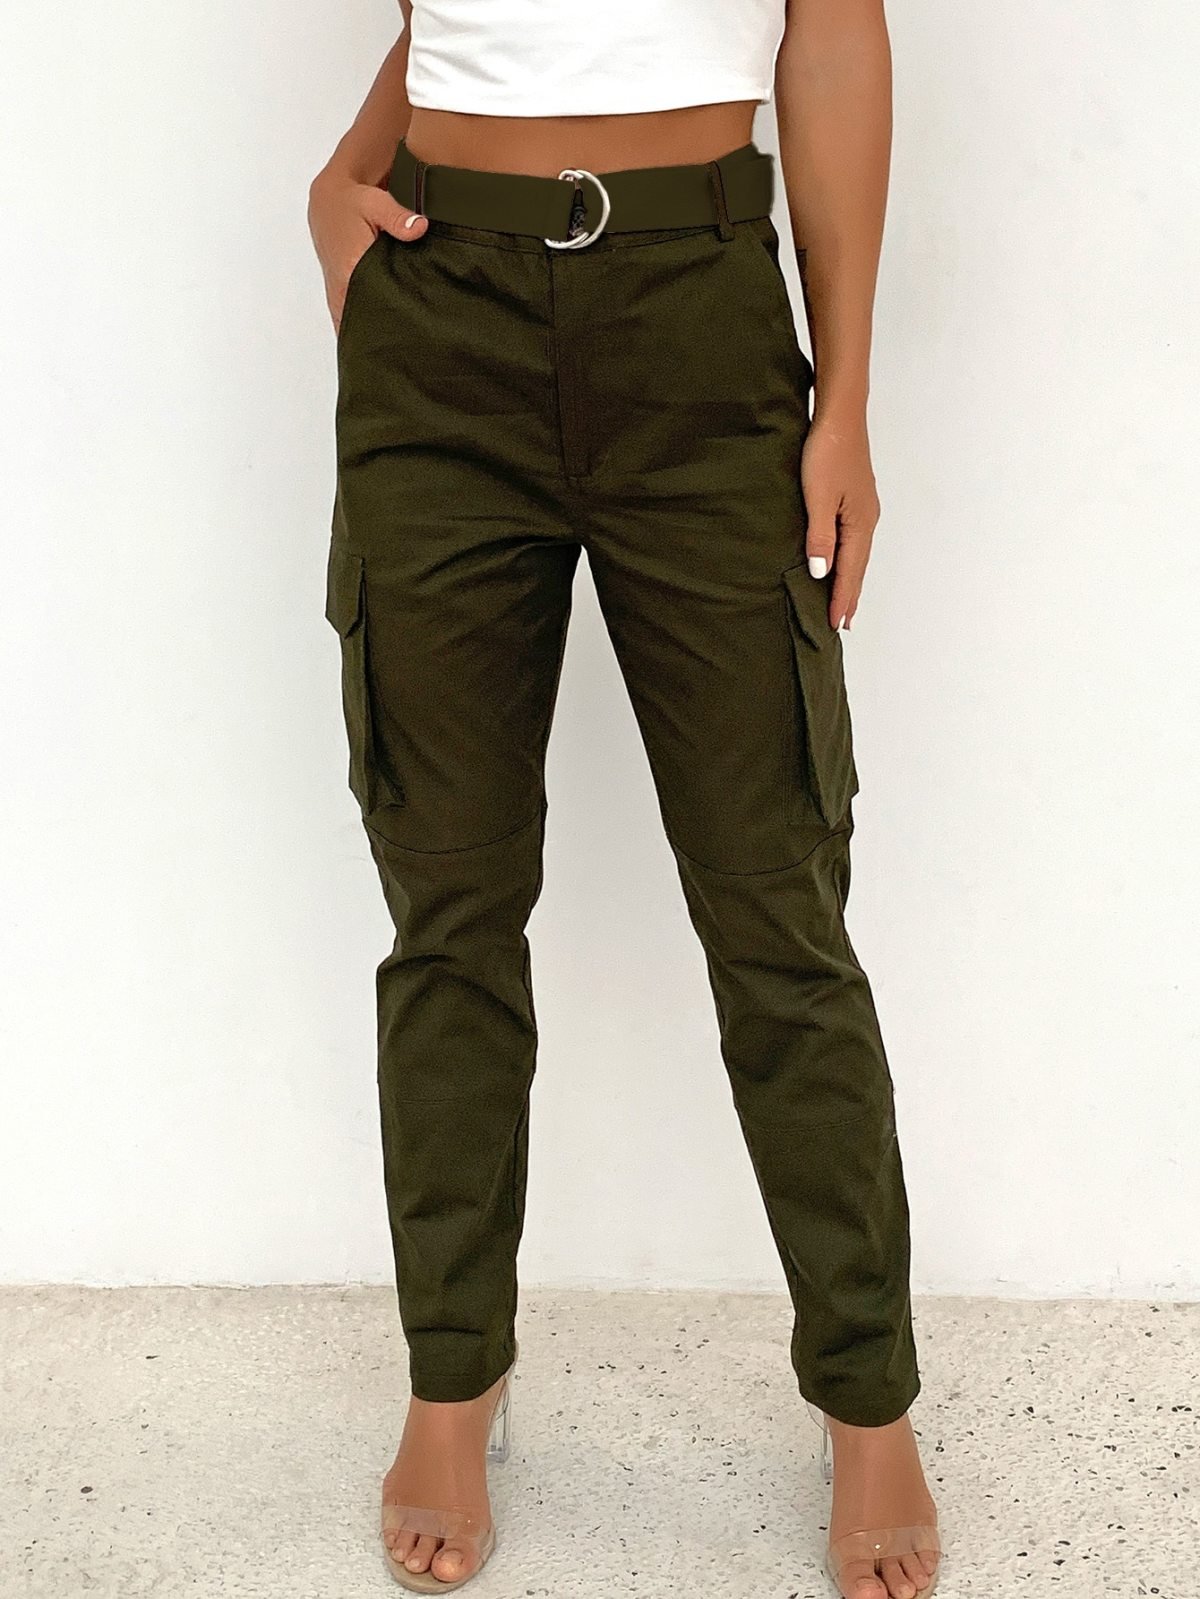 Buckle Belted Solid Cargo Pants - Shah S. Sahota